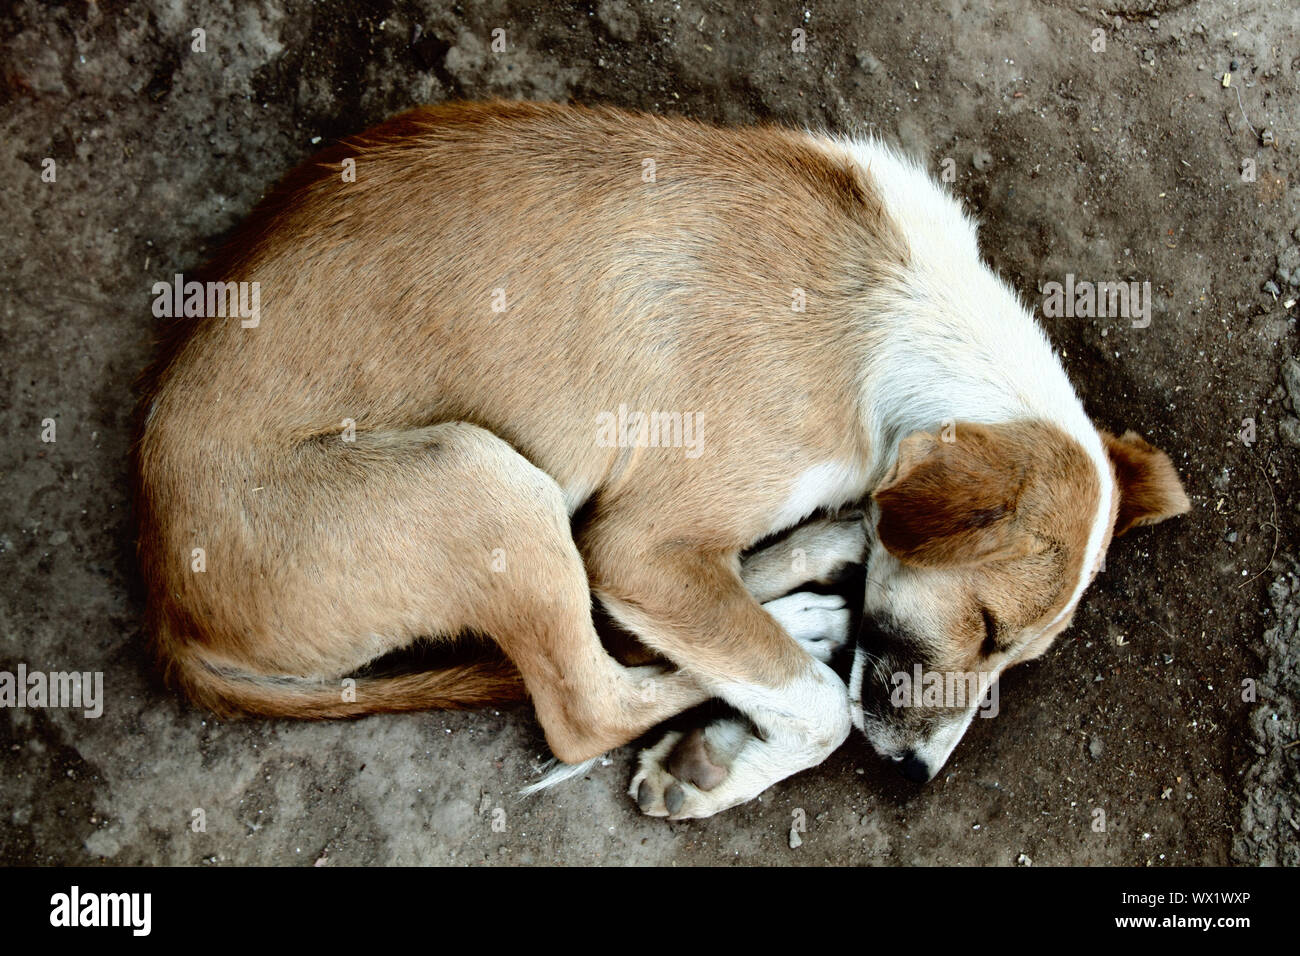 Stray dog on pavement, top view Stock Photo